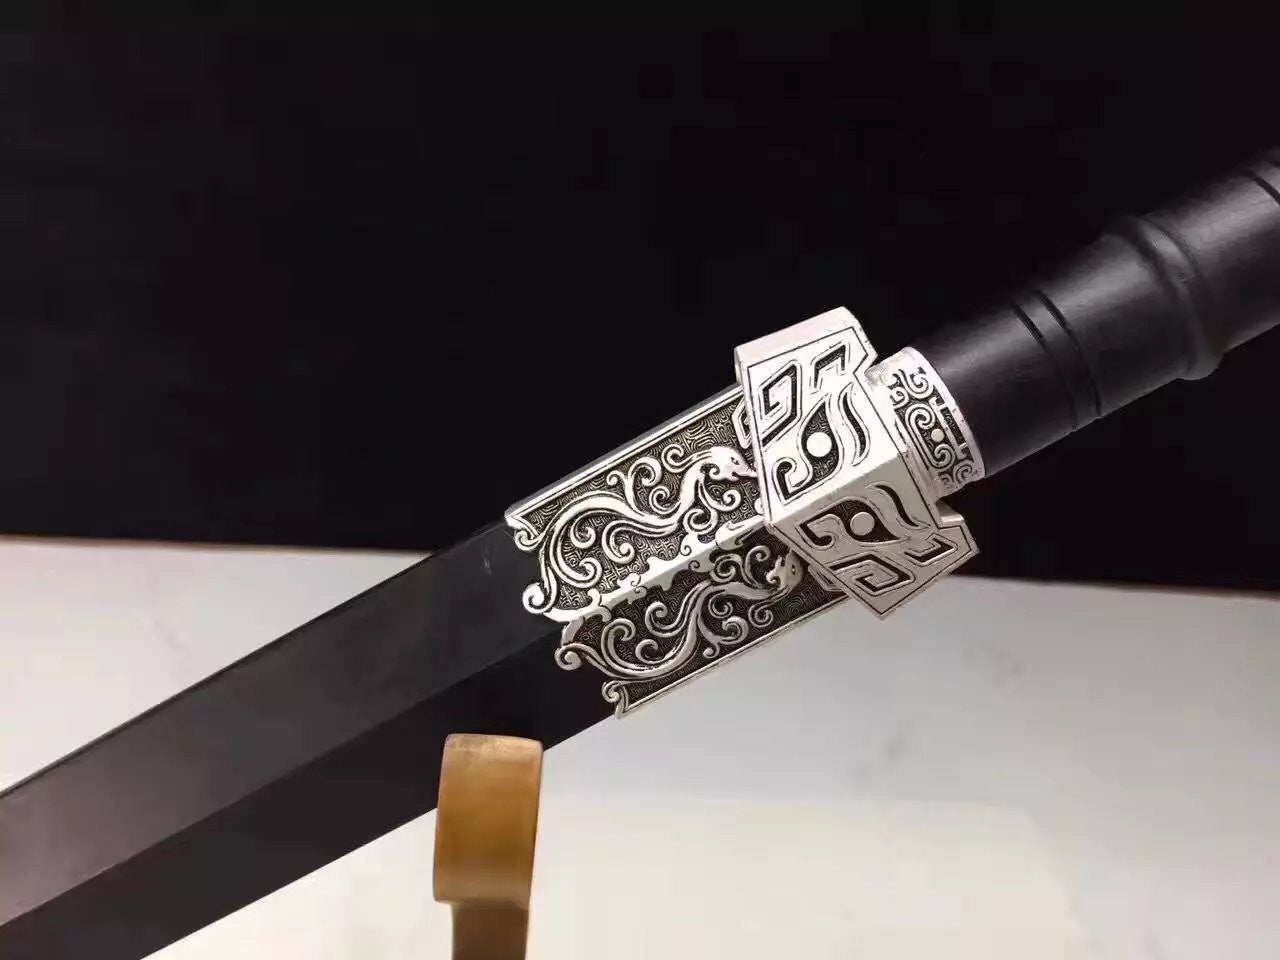 CHIBI sword,High carbon steel,Wood scabbard,Alloy fitting&Handmade art - Chinese sword shop